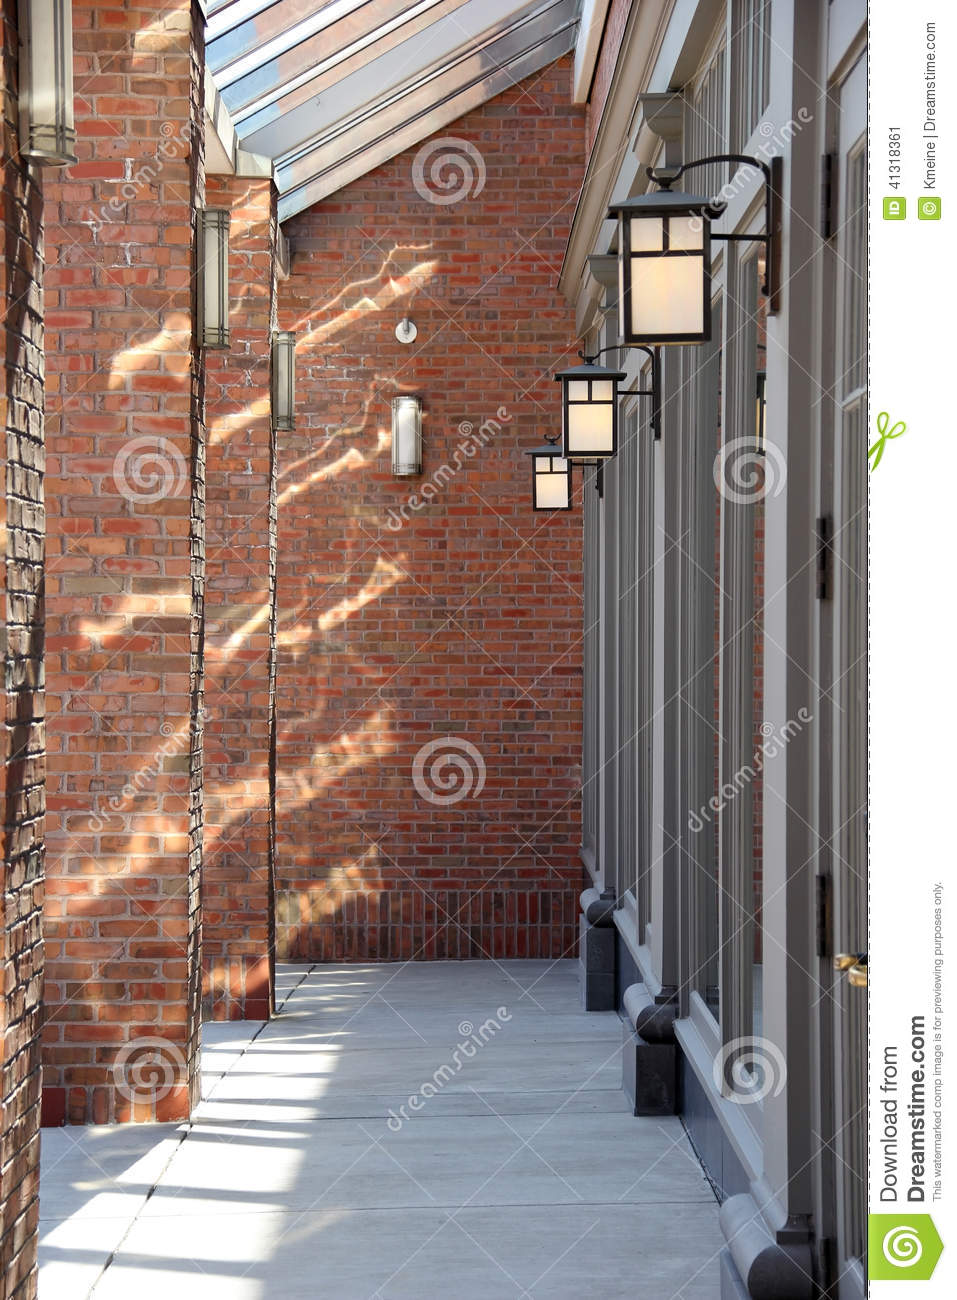 Outdoor Brick Patio With Lantern Lights And Light Reflection Stock